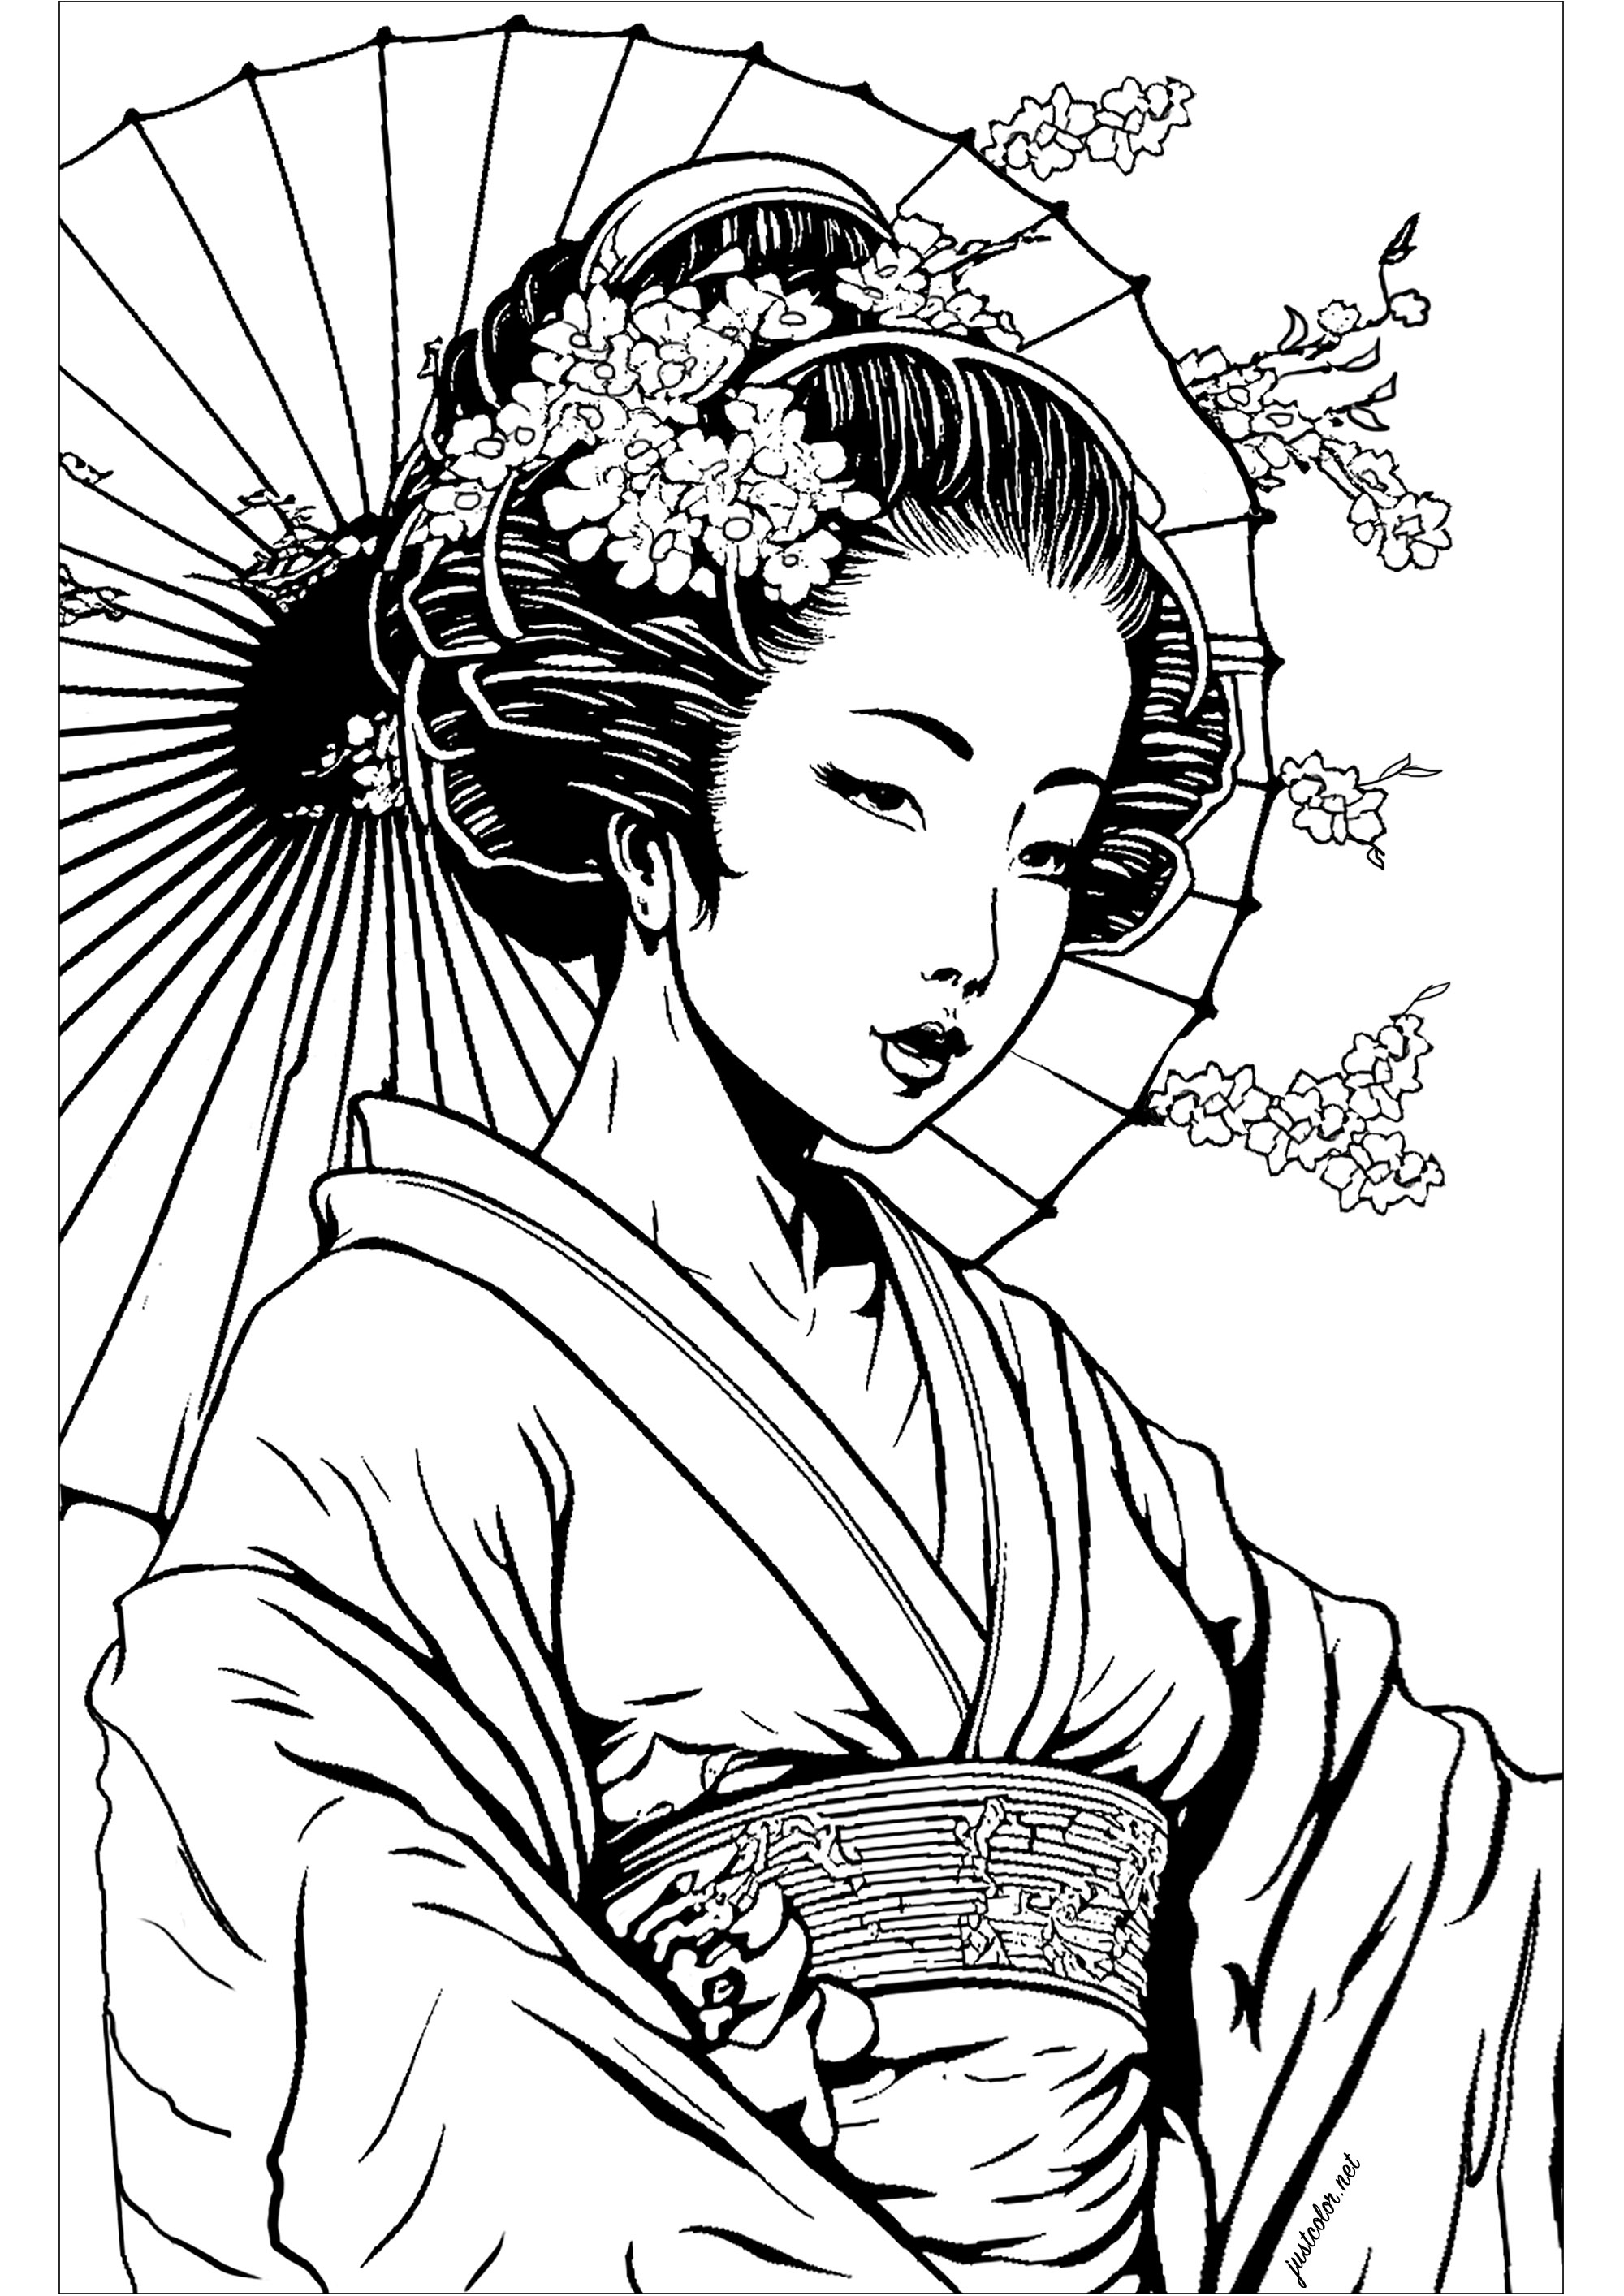 Beautiful Geisha to color. The Geisha is represented in a classical pose, with a serene and benevolent expression. The composition is very simple, but it is very expressive and will give you a sense of calm and relaxation.